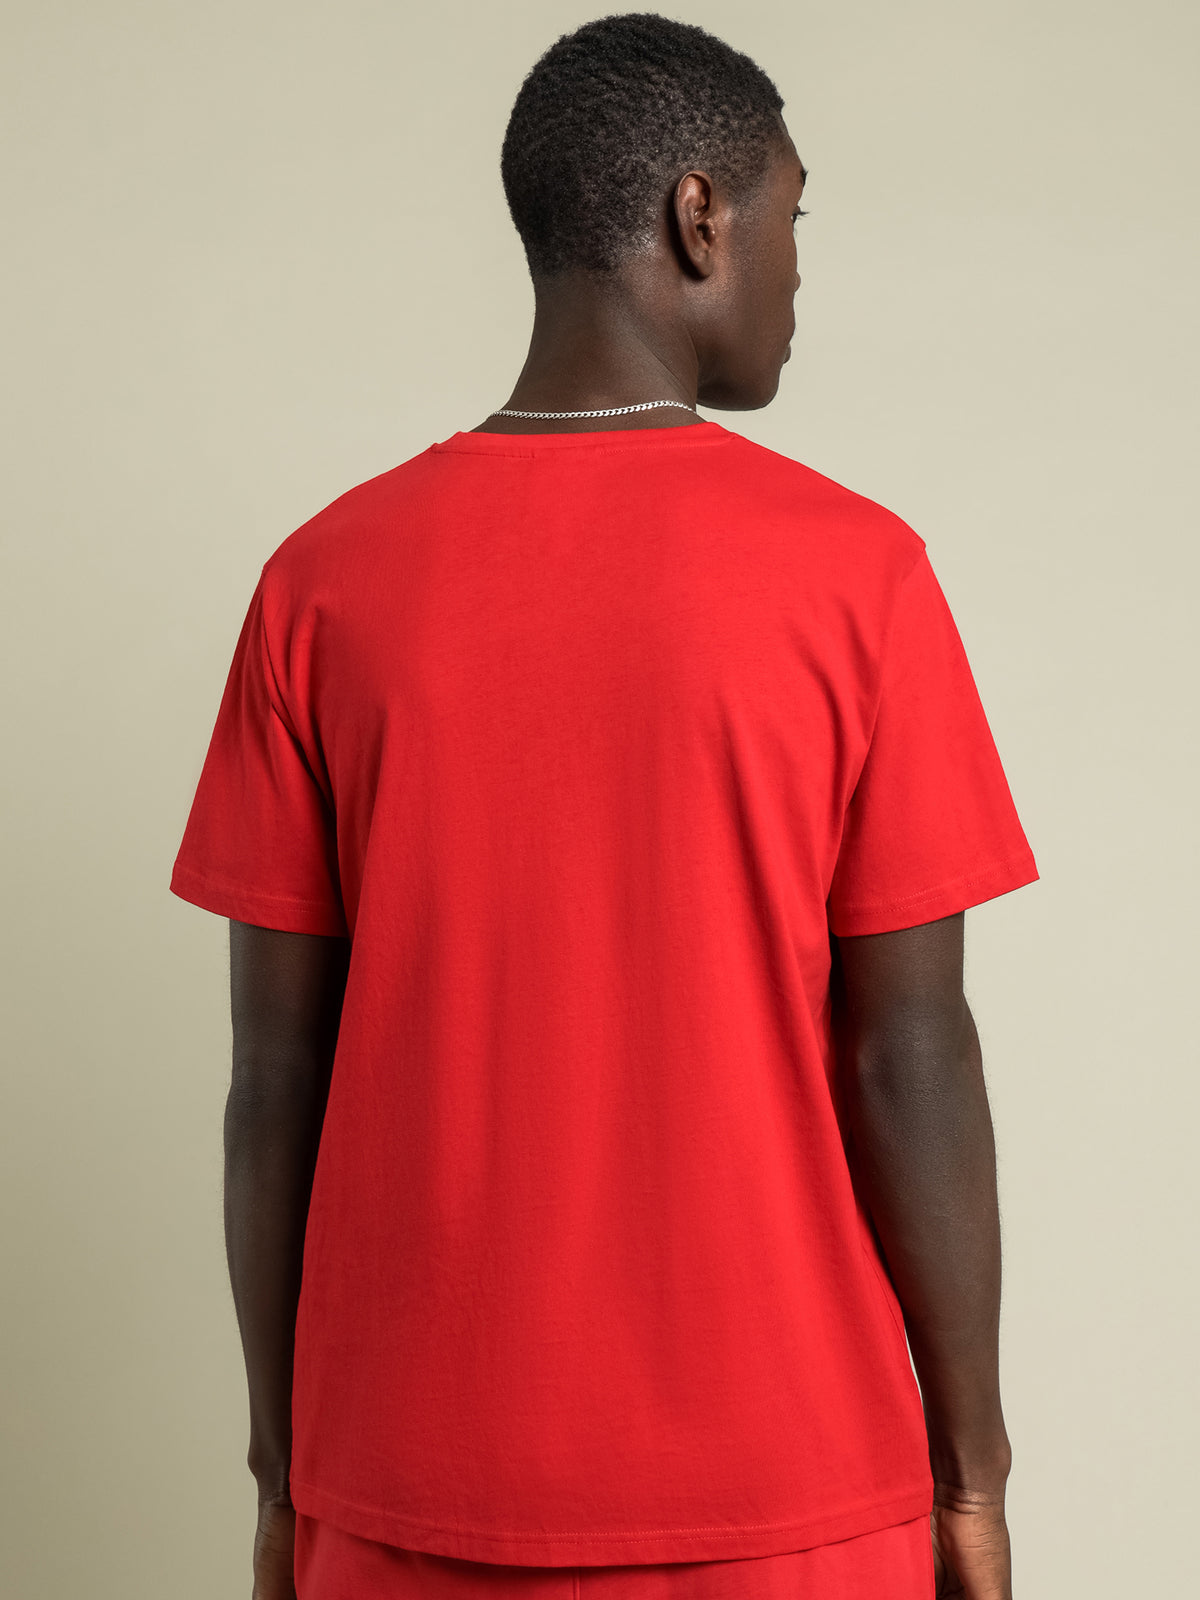 Authentic Damian T-Shirt in Red